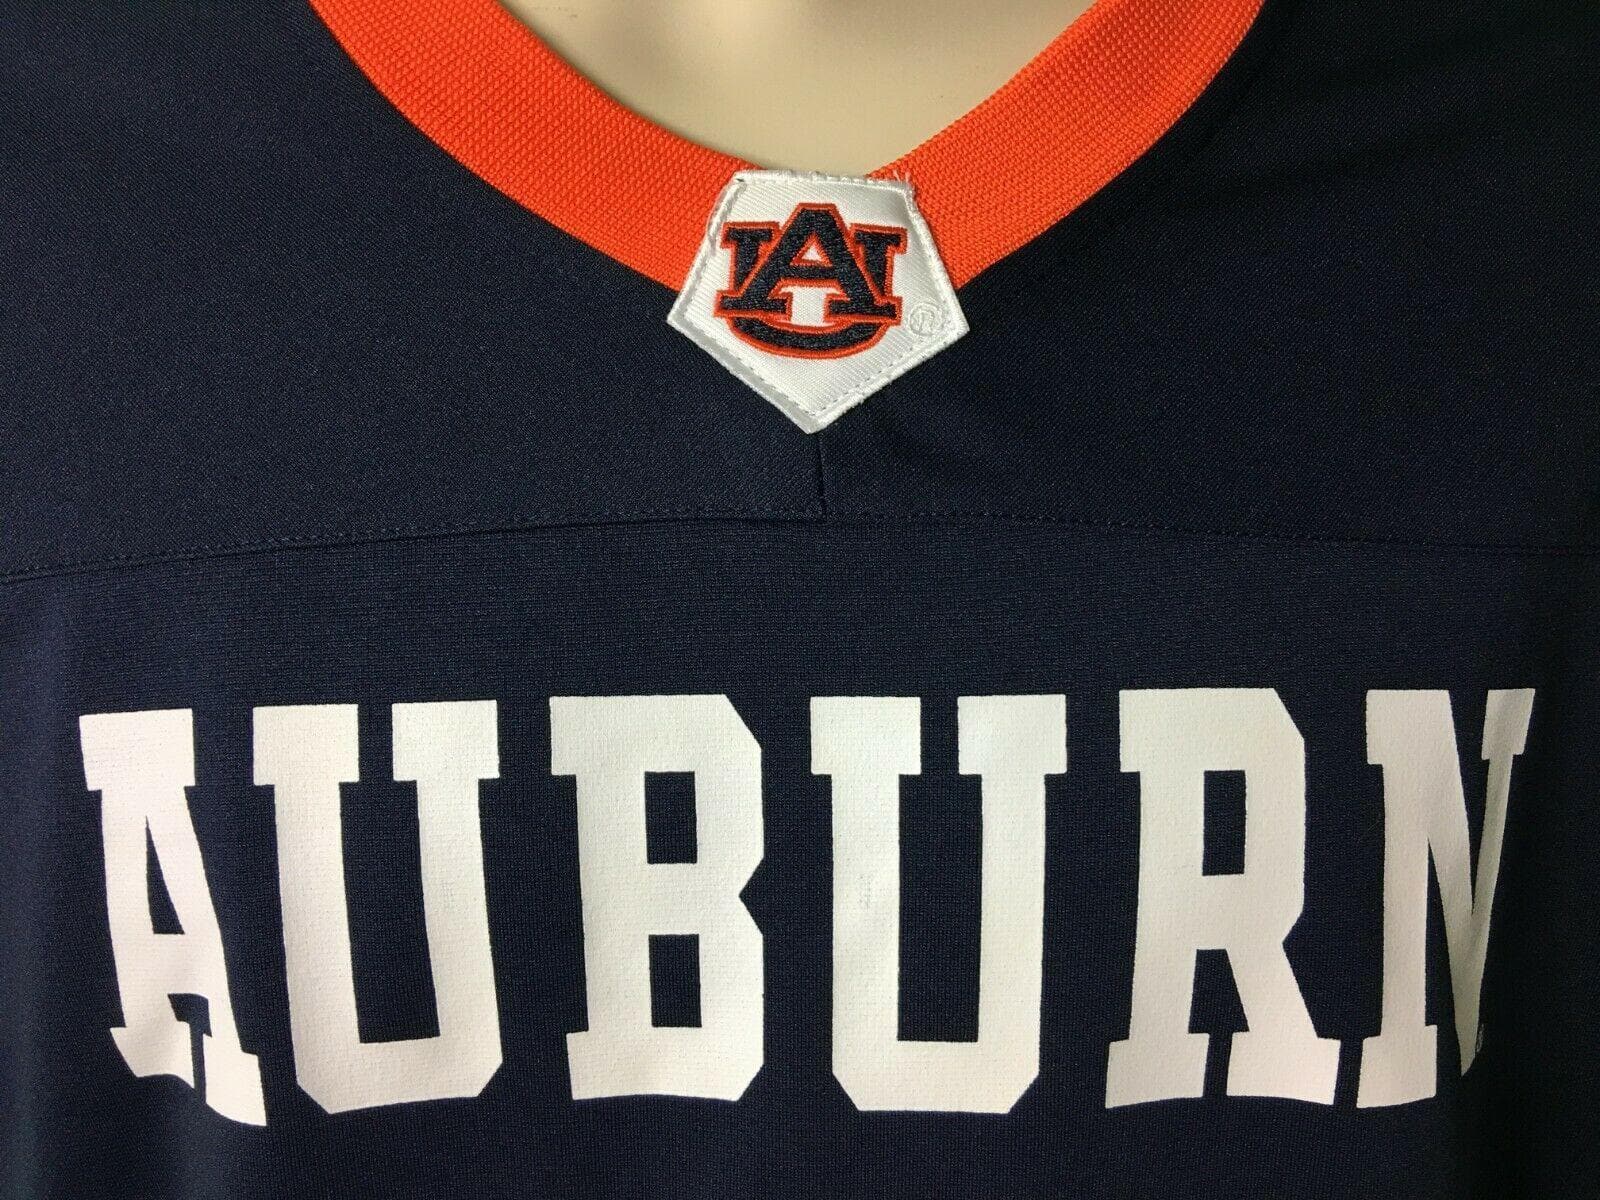 NCAA Auburn Tigers Colosseum Jersey Youth Large 16-18